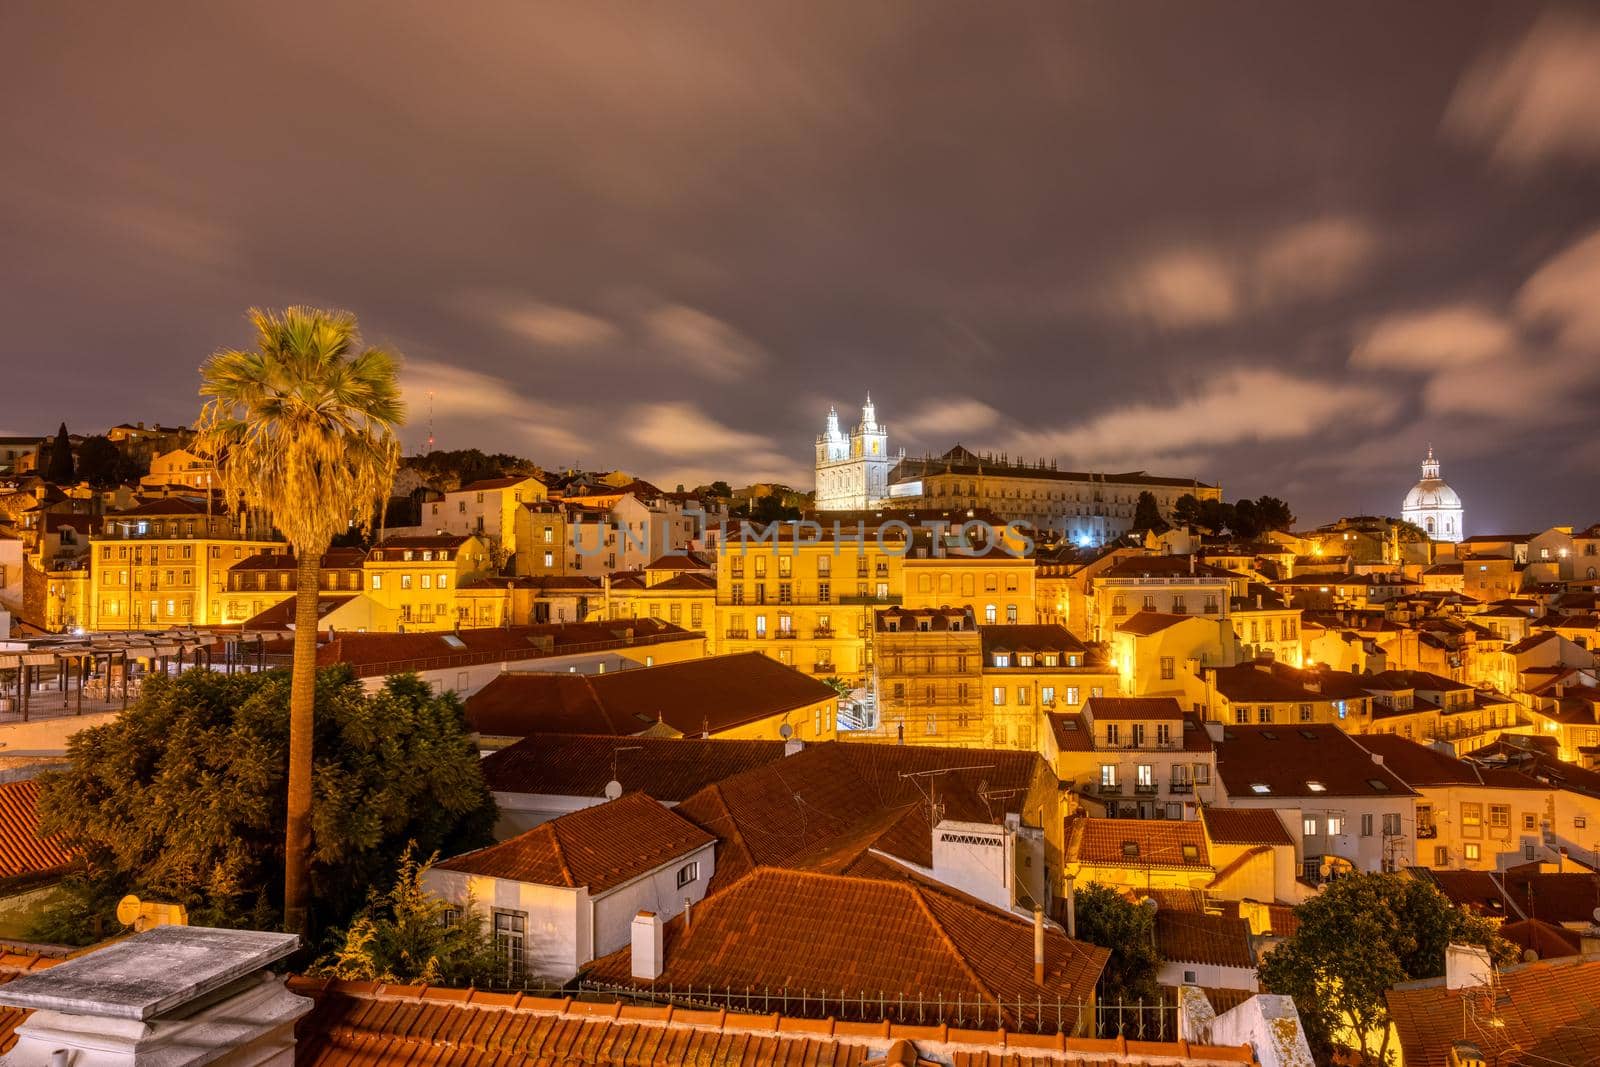 The old Alfama district in Lisbon at night by elxeneize